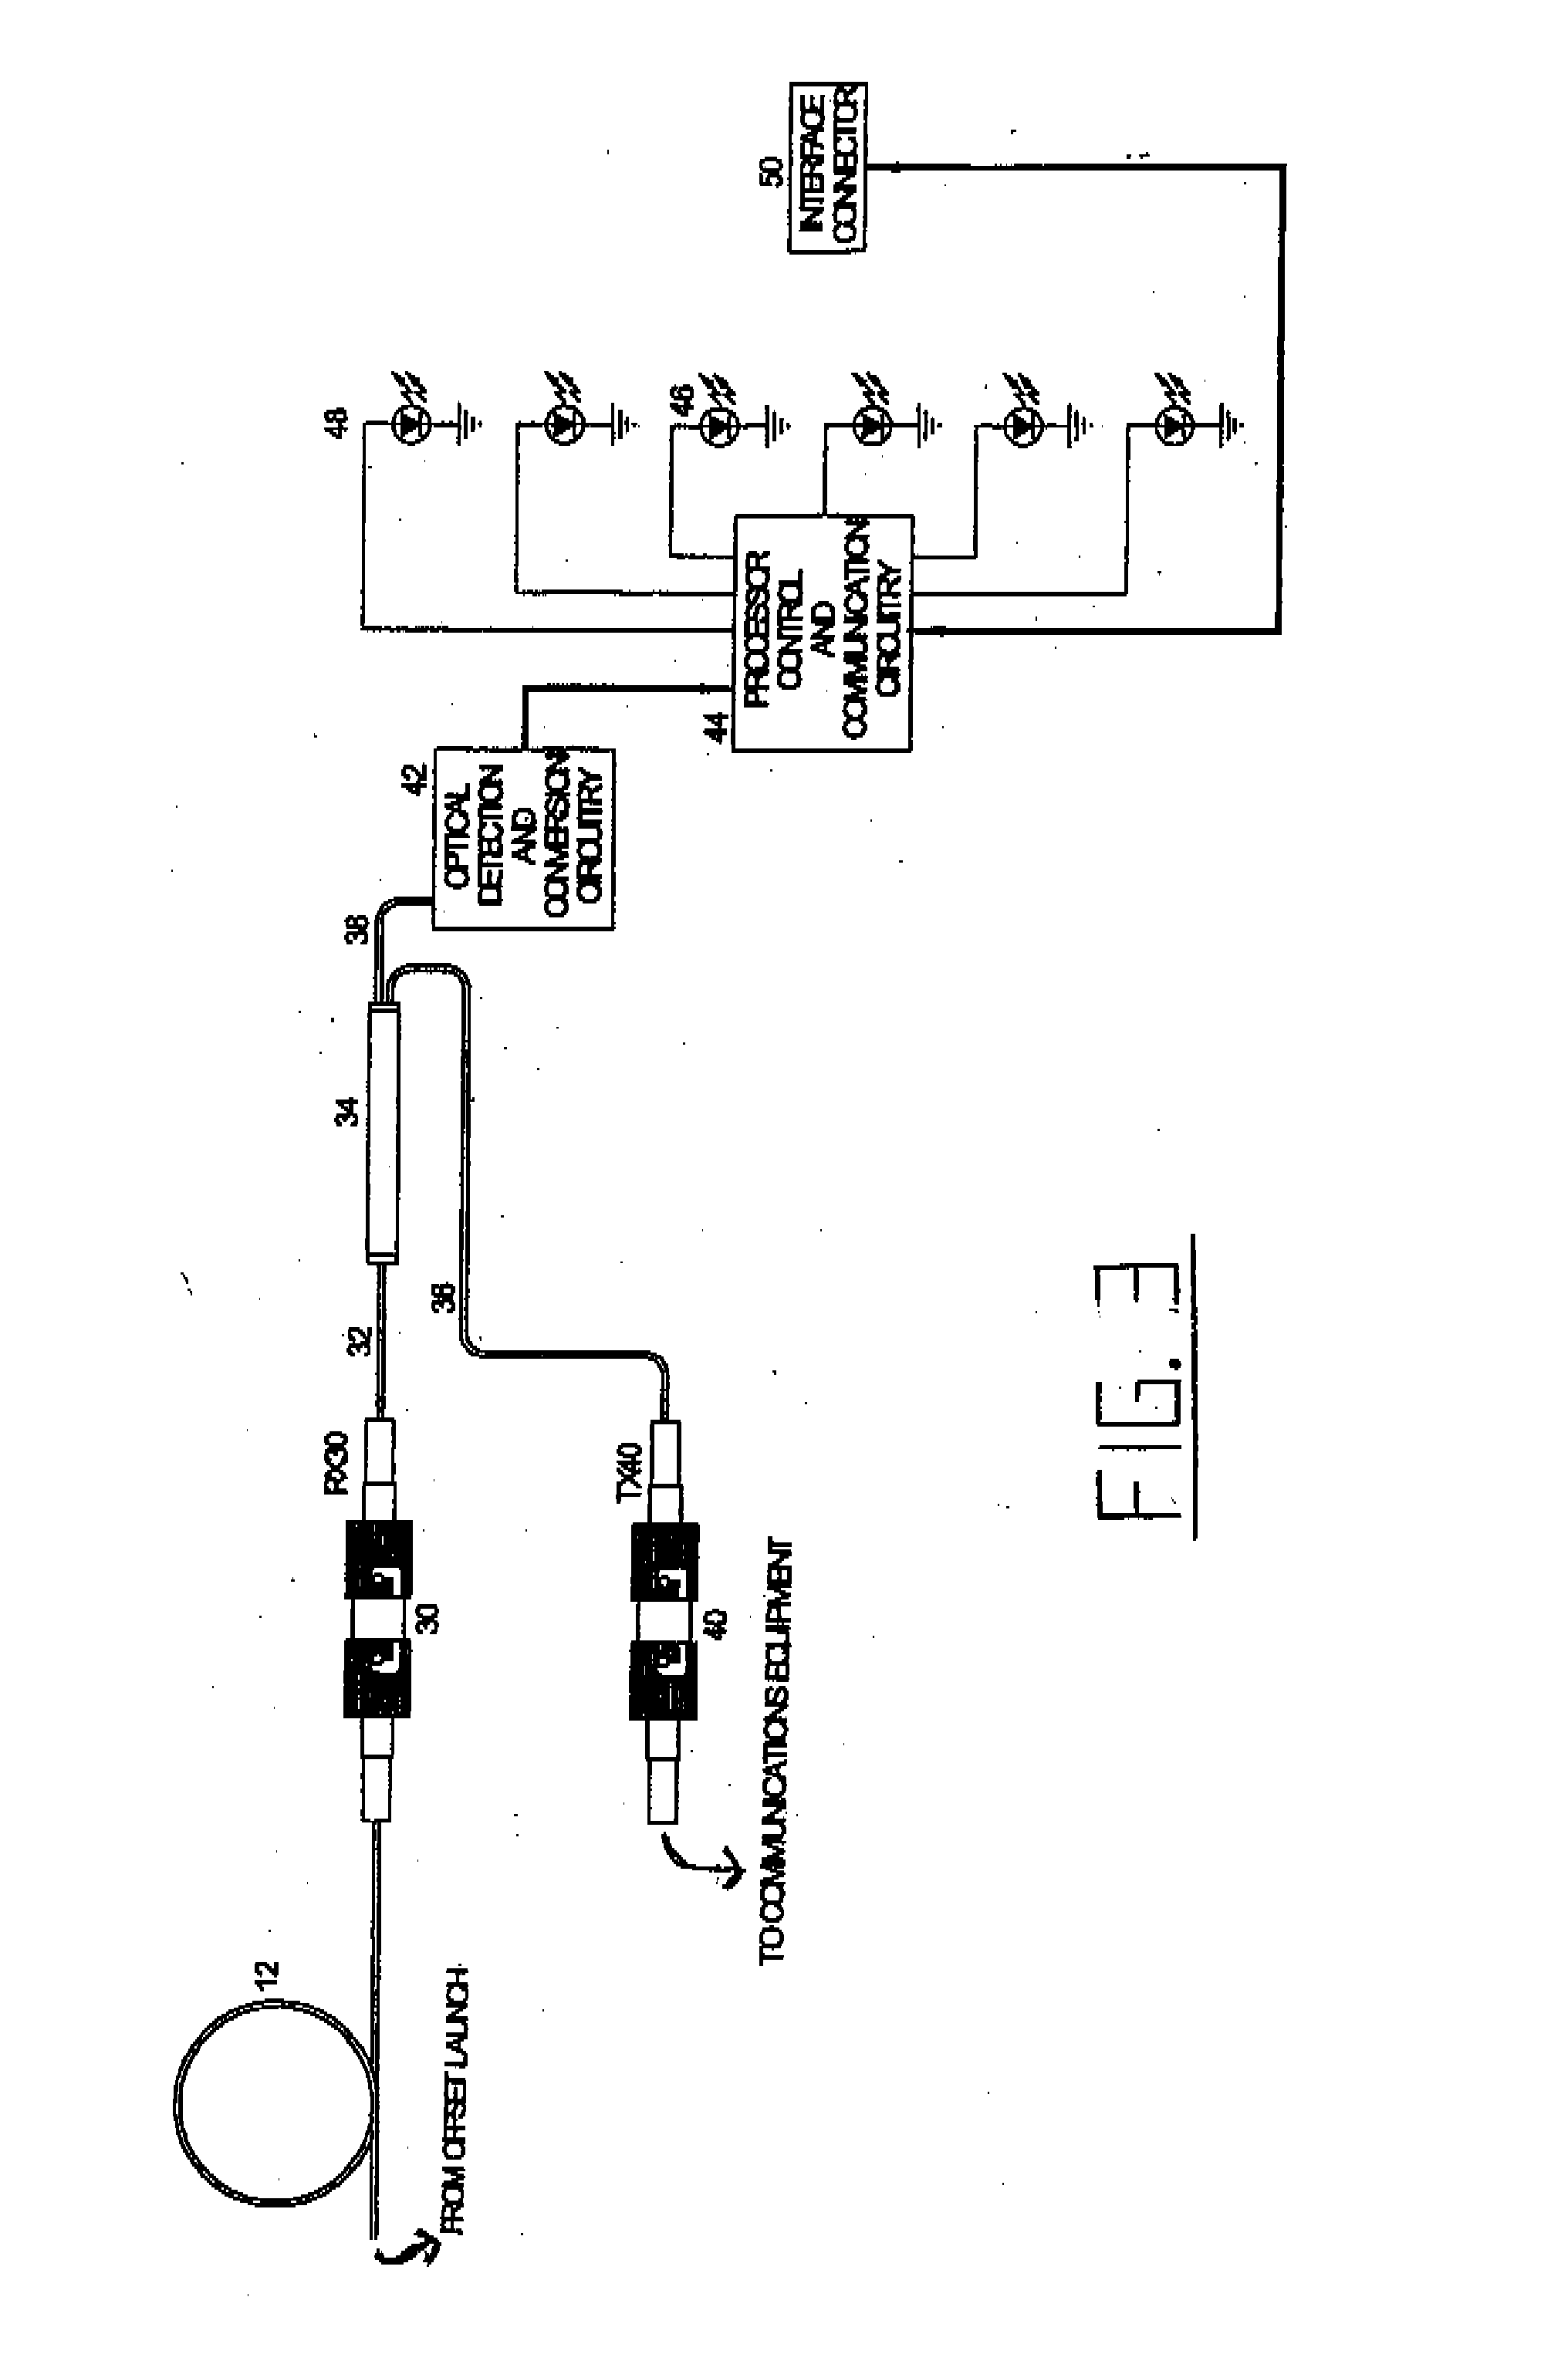 Remote location of active section of fiber in a multimode intrusion detection system